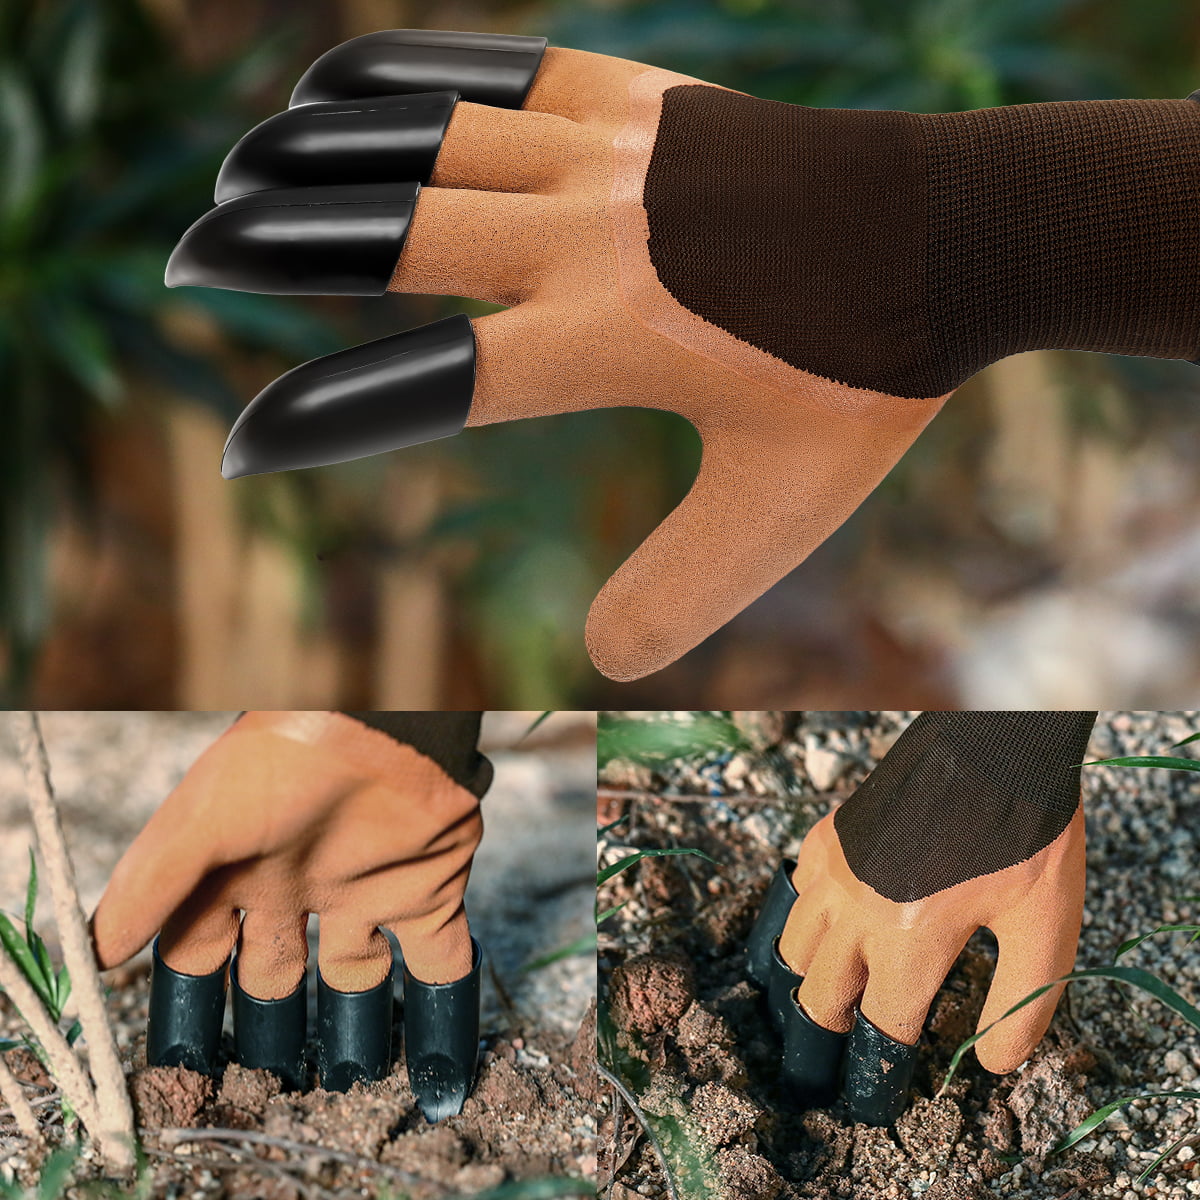 Garden Gloves with 4 ABS Plastic Claws for garden Digging Planting 